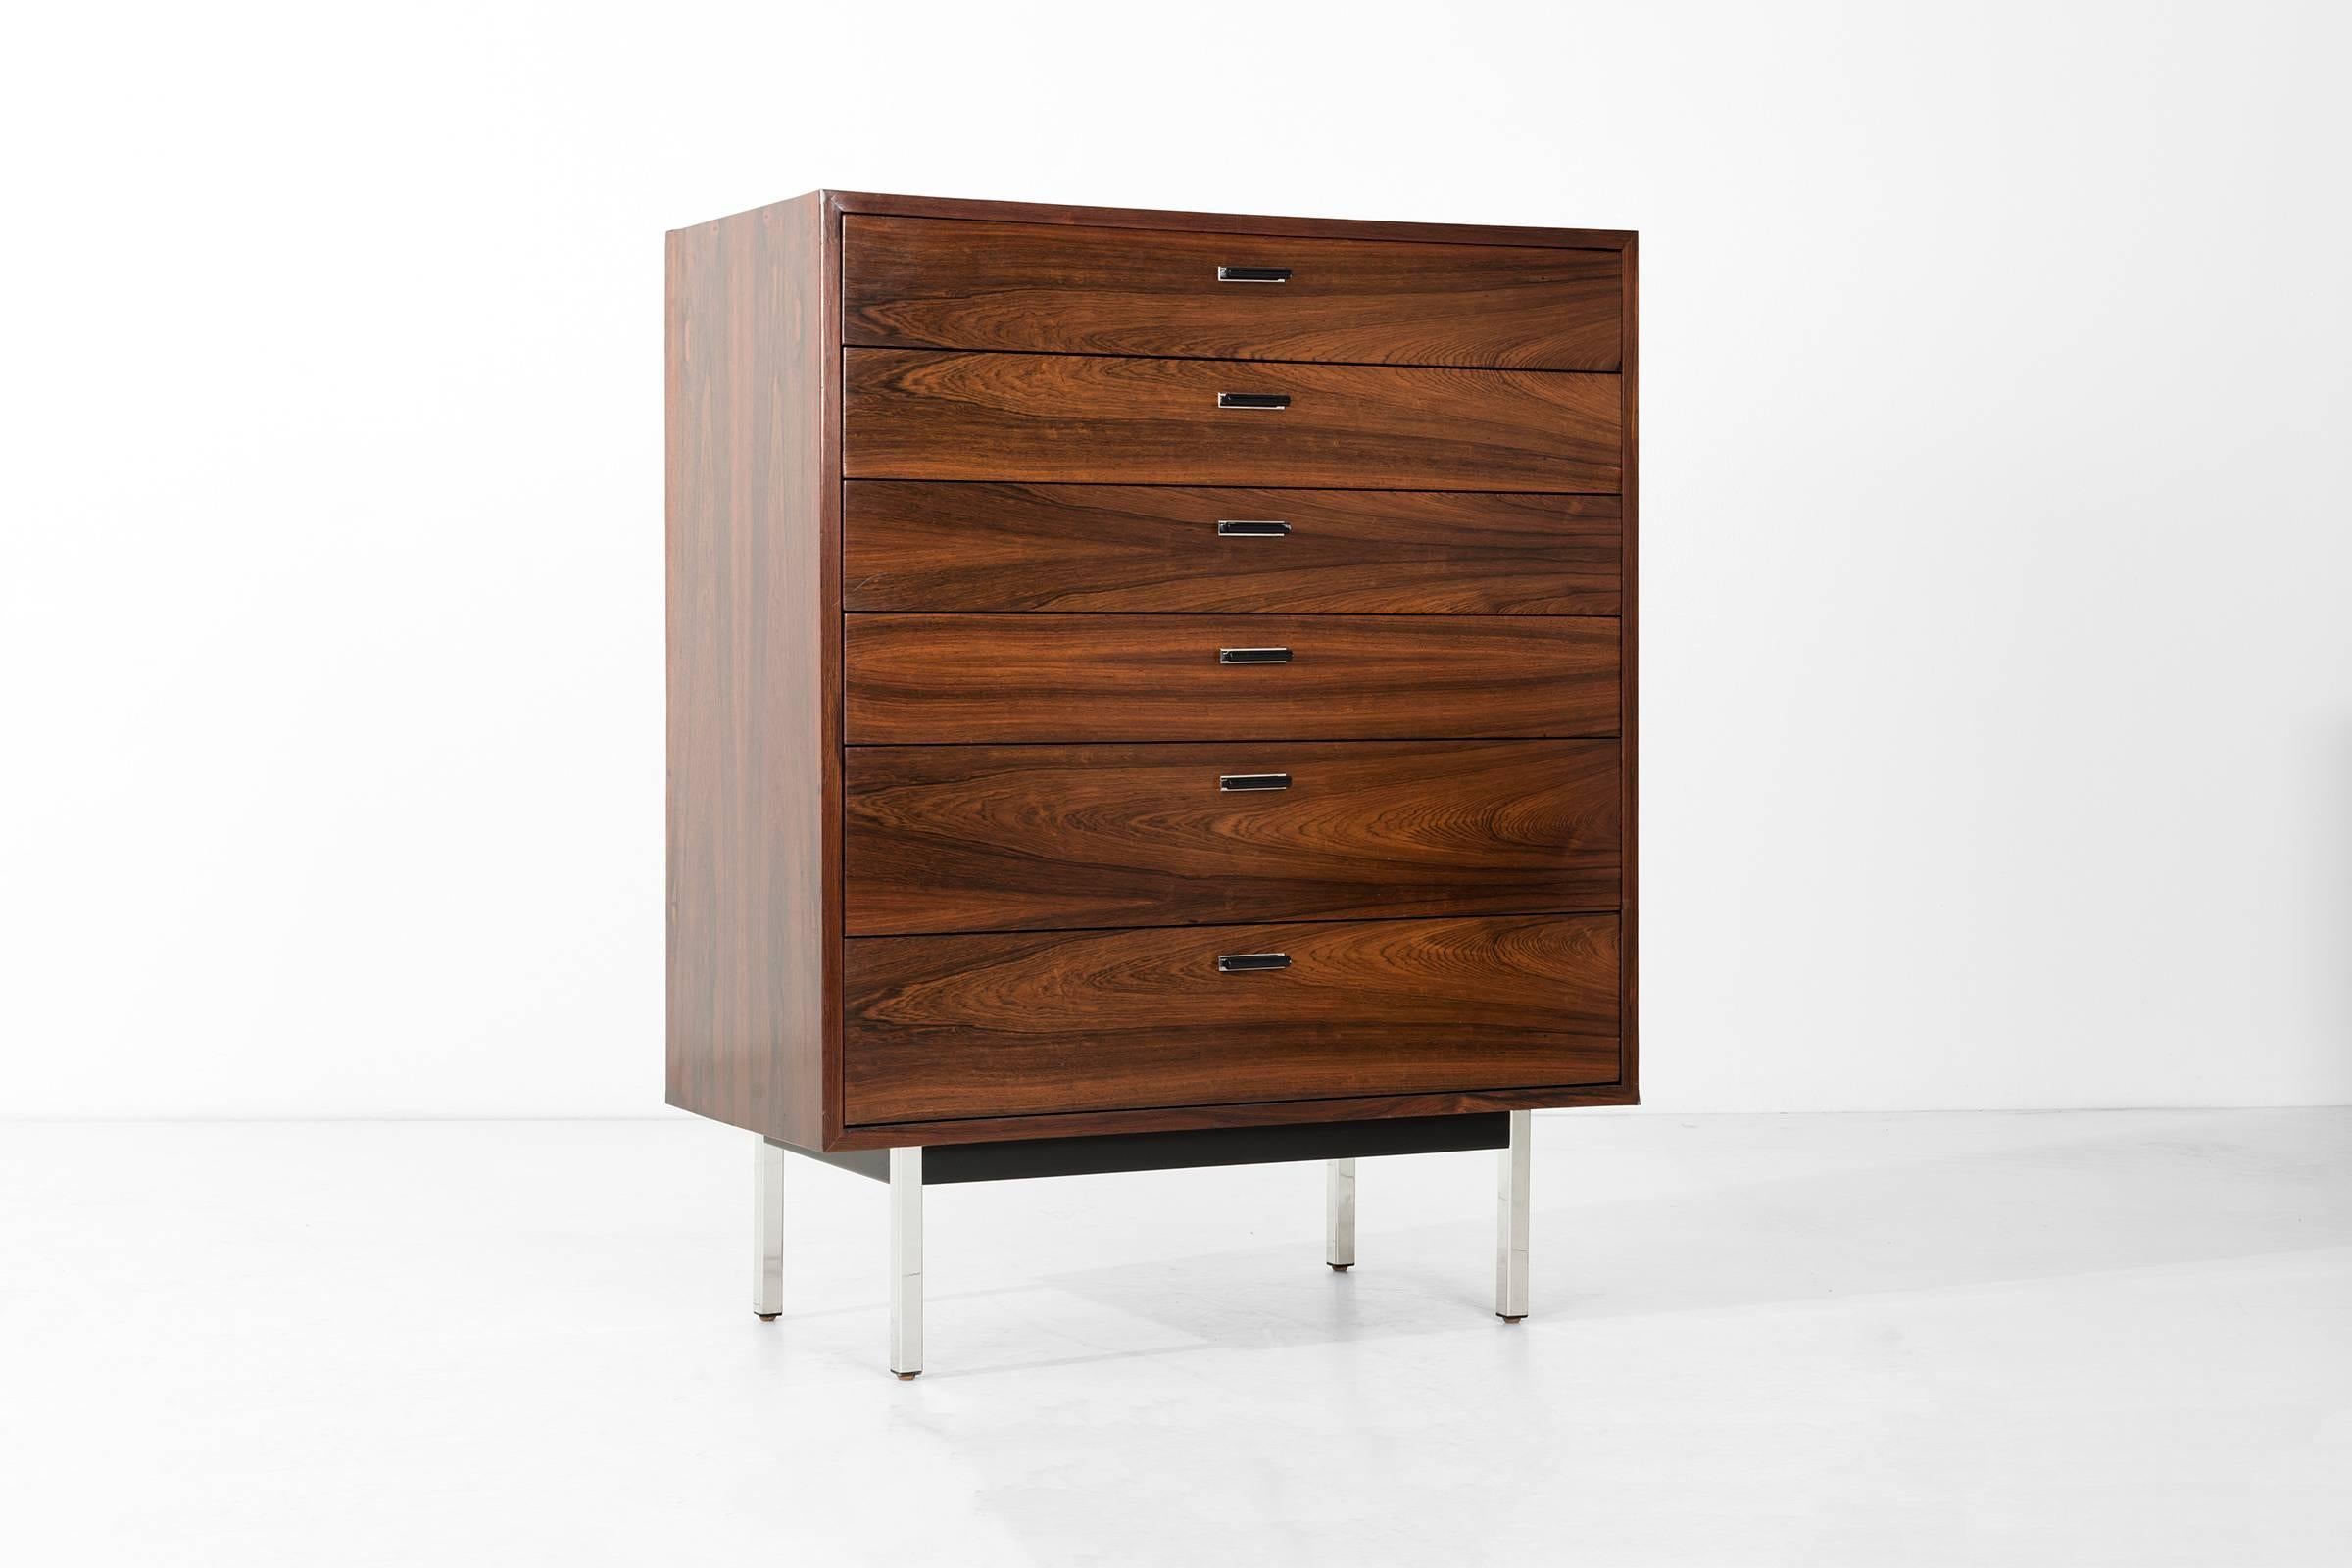 Rosewood and chrome six-drawer dresser by Harvey Probber.  Probber (b.1922-d.2003) was an iconic American designer who was an early pioneer of modular seating in the 1940's. His design aesthetic was elegant, sophisticated and leaned toward a